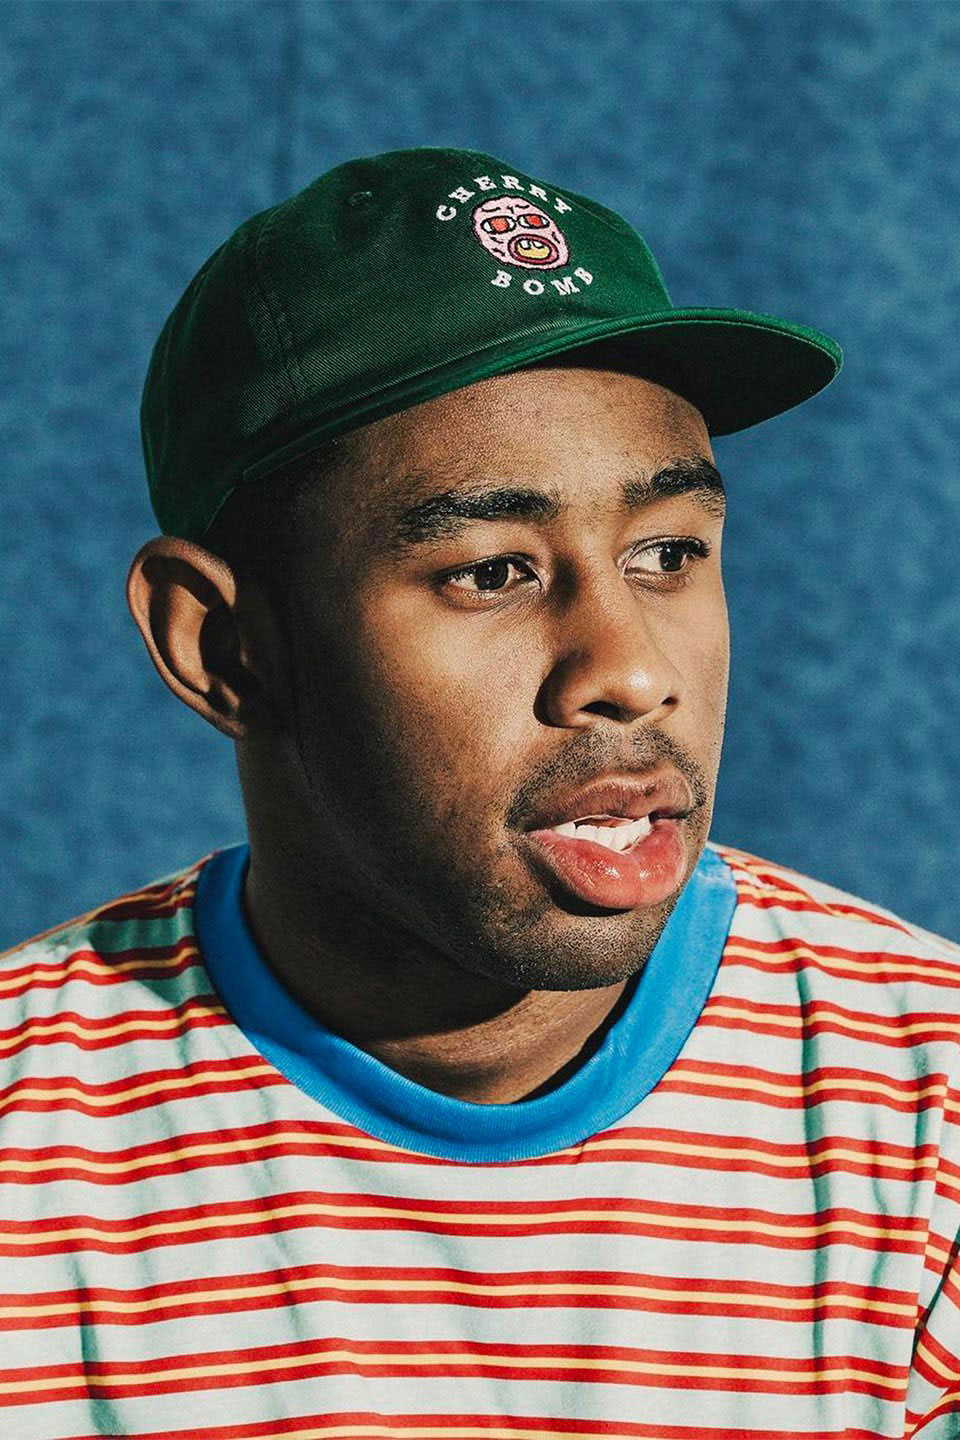 Tyler, The Creator Loves Skincare: A Lyrical Investigation